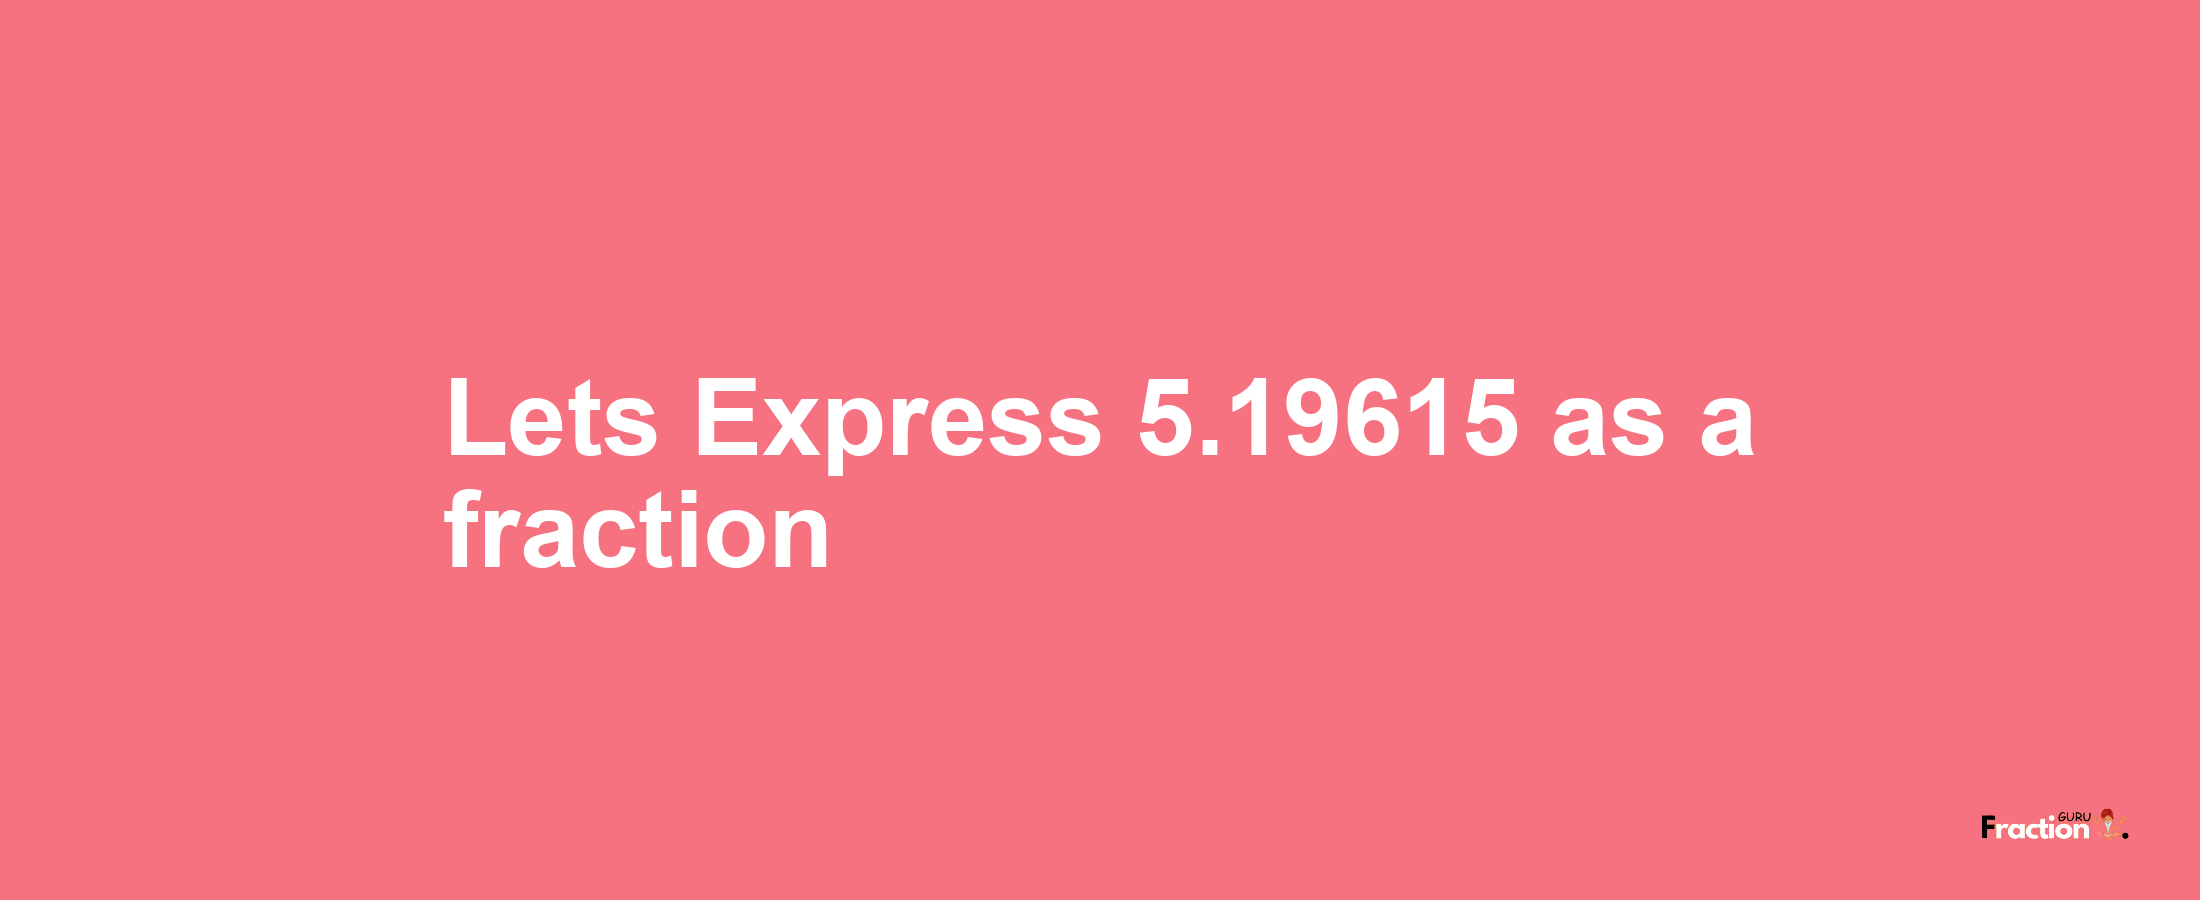 Lets Express 5.19615 as afraction